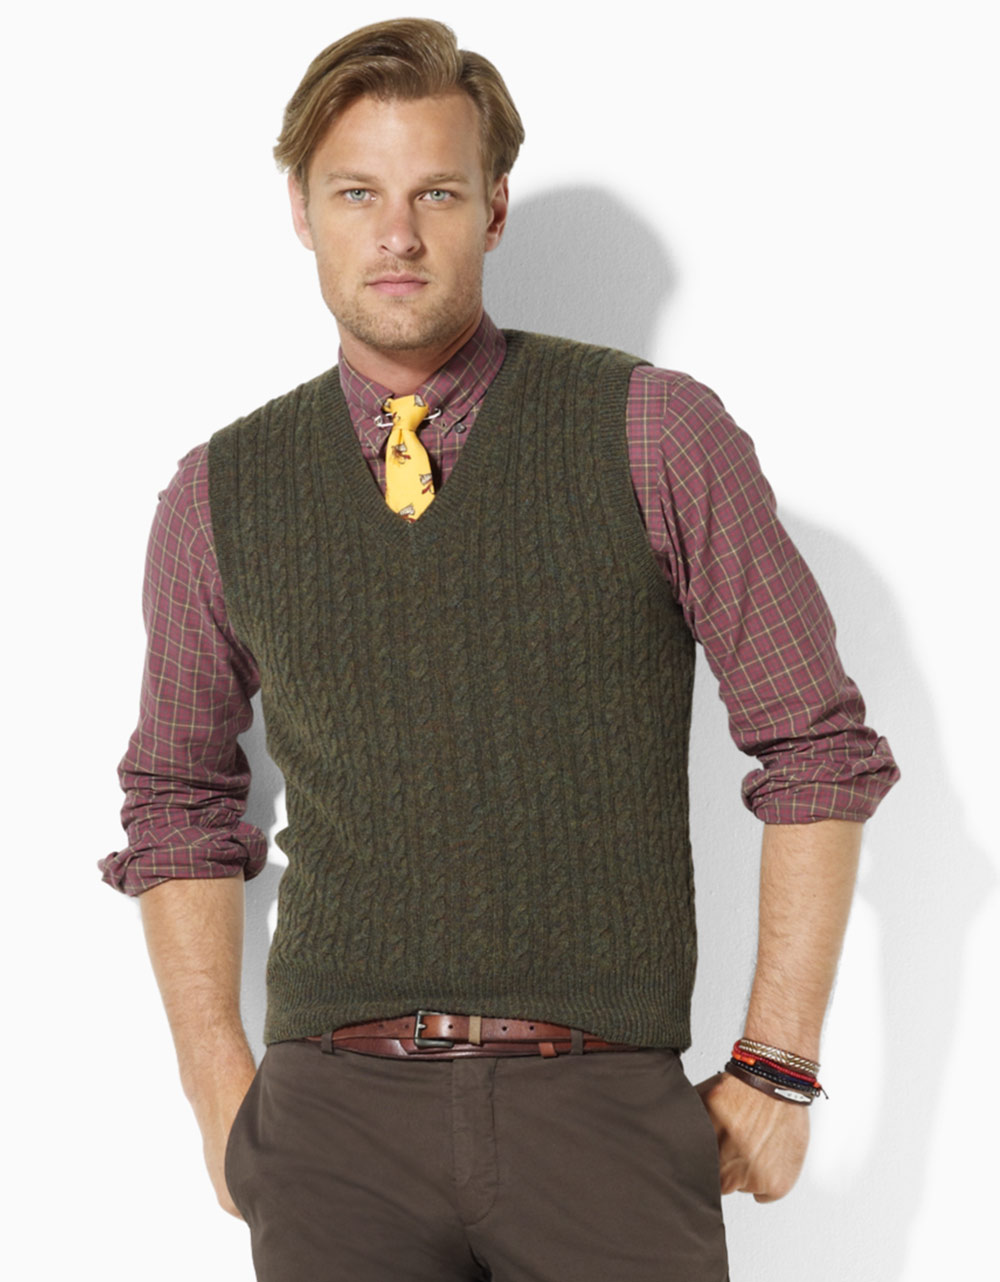 Lyst - Polo Ralph Lauren Merino Wool Cable Knit V-neck Sweater Vest in ...